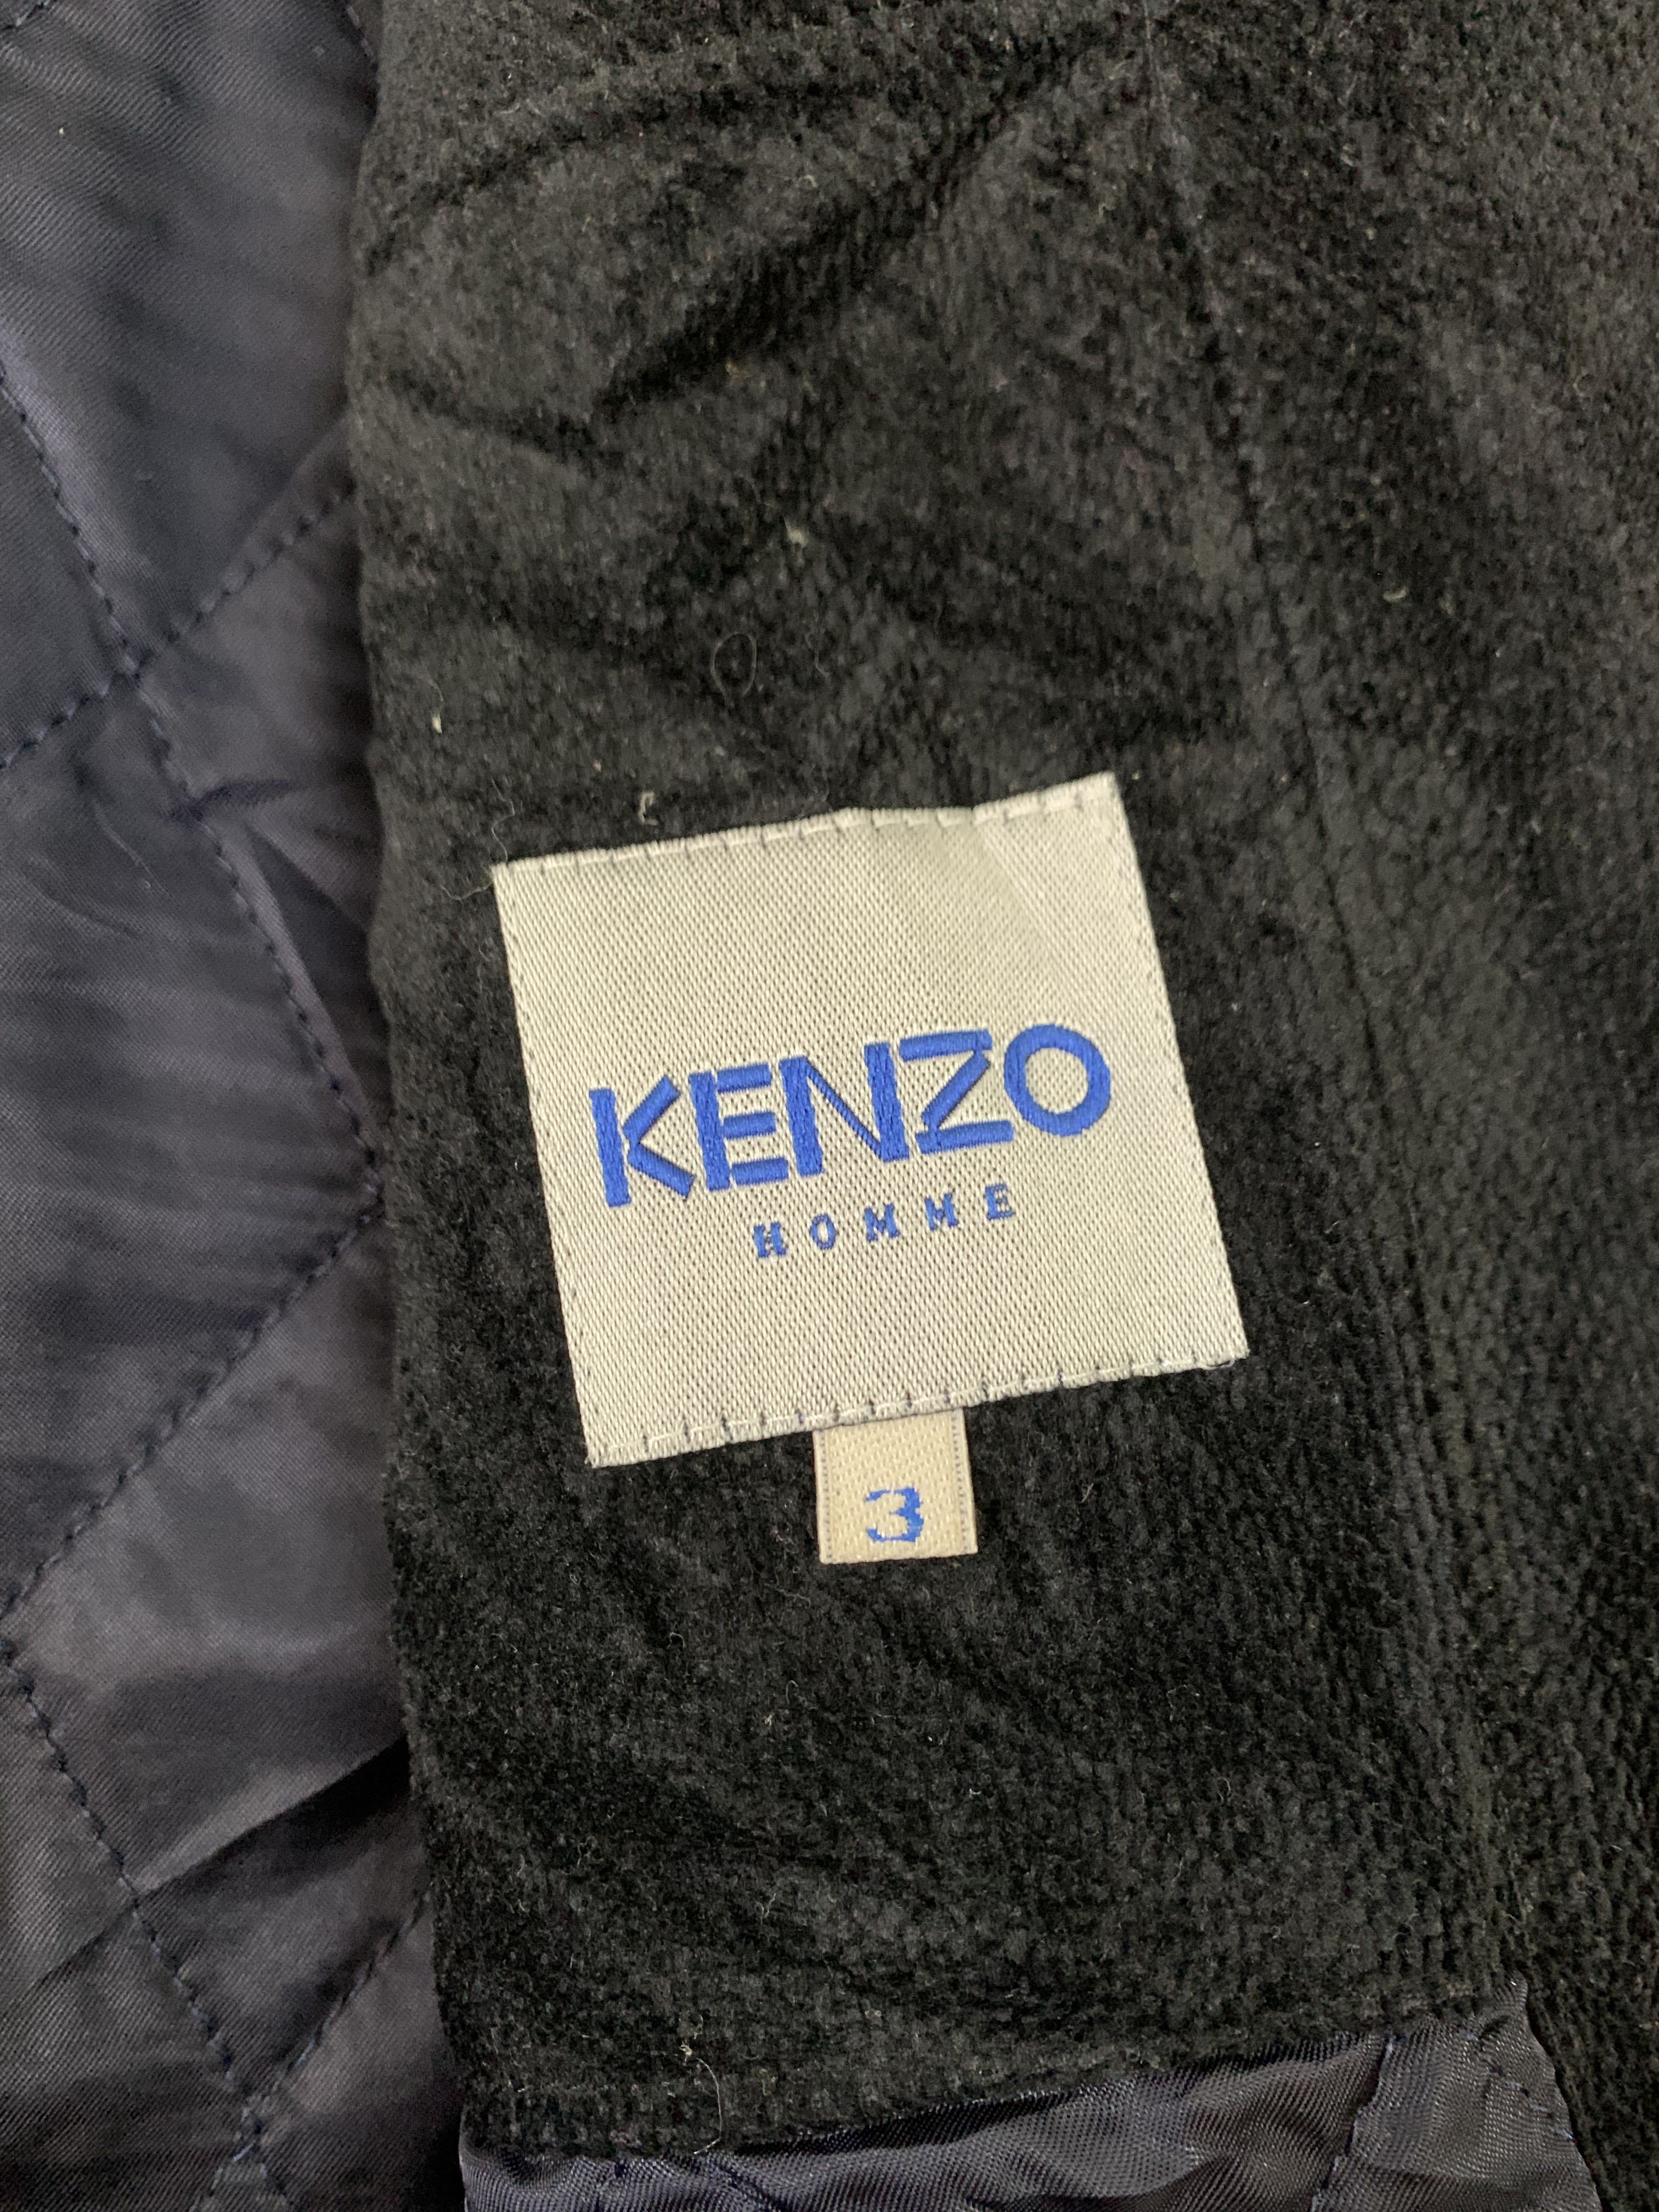 Kenzo Homme Jacket Made in Japan - 5